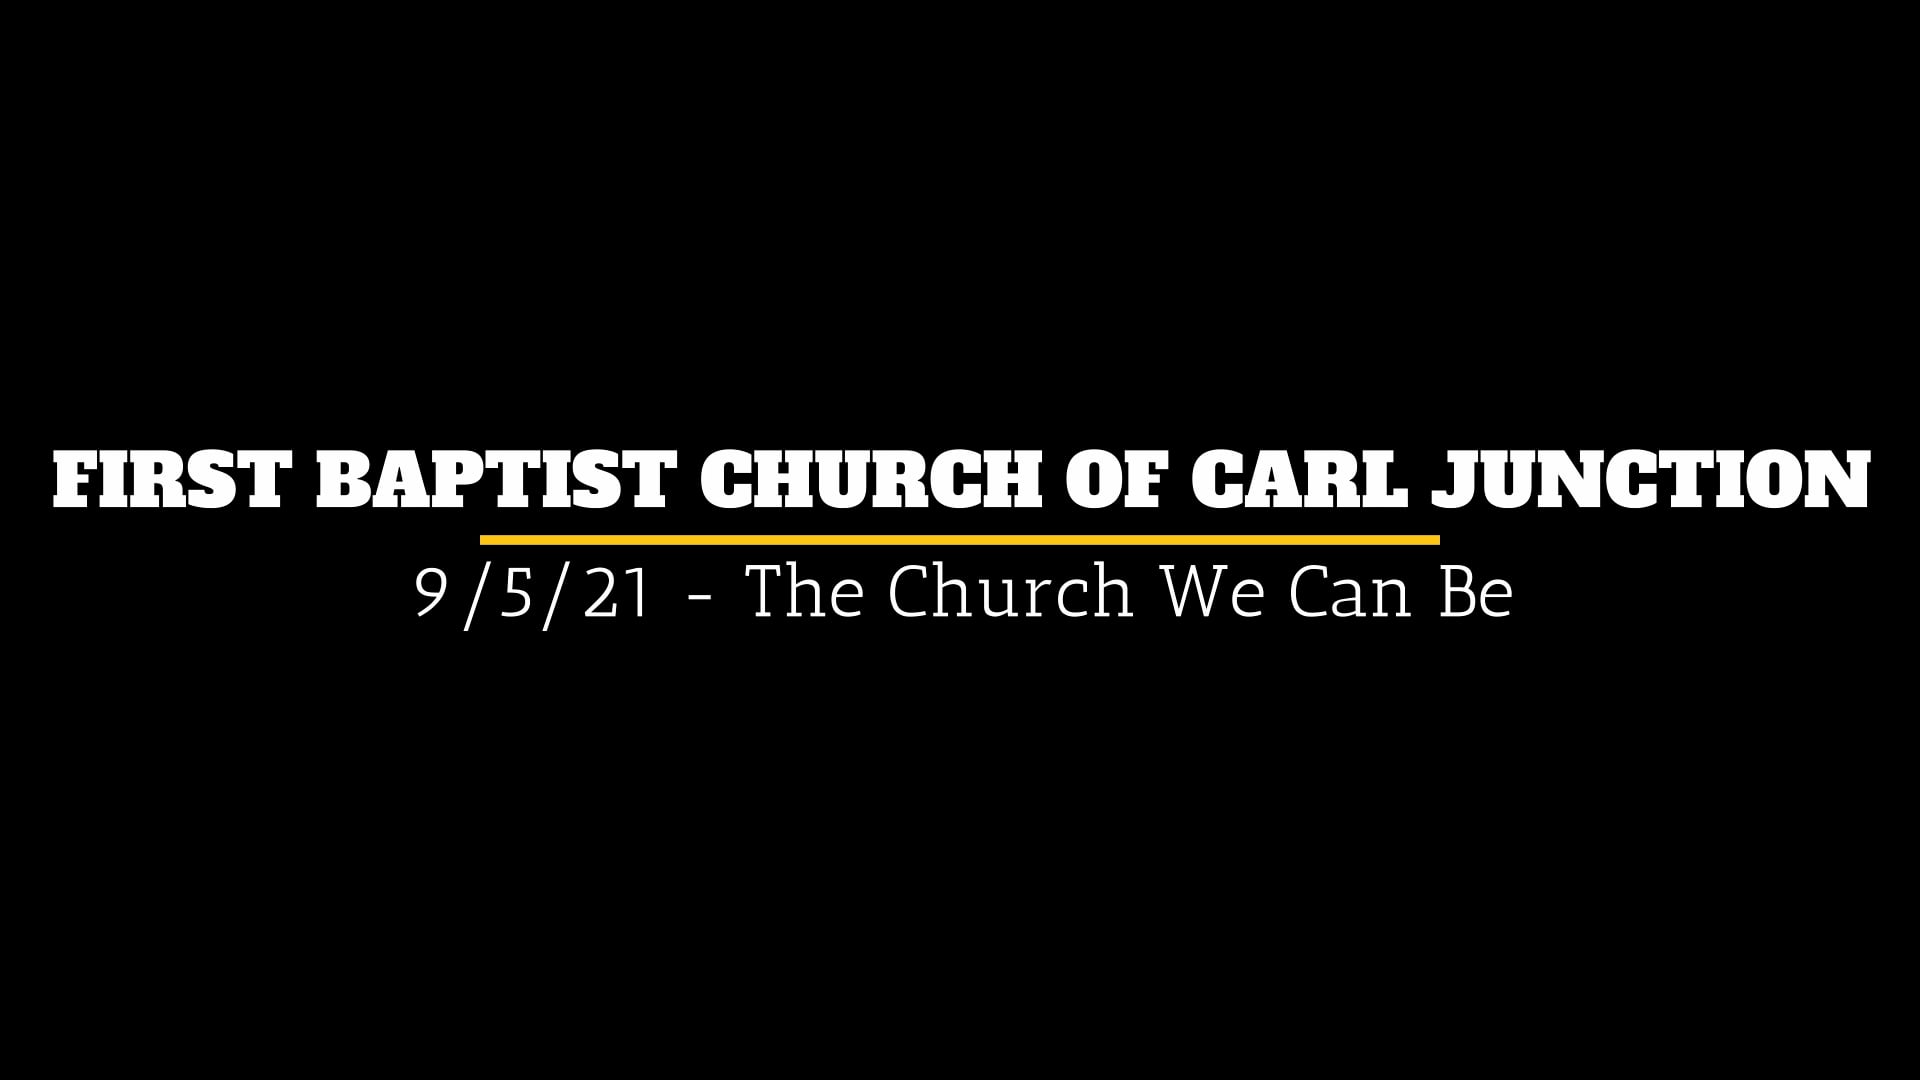 09.05.21 - The Church We Can Be